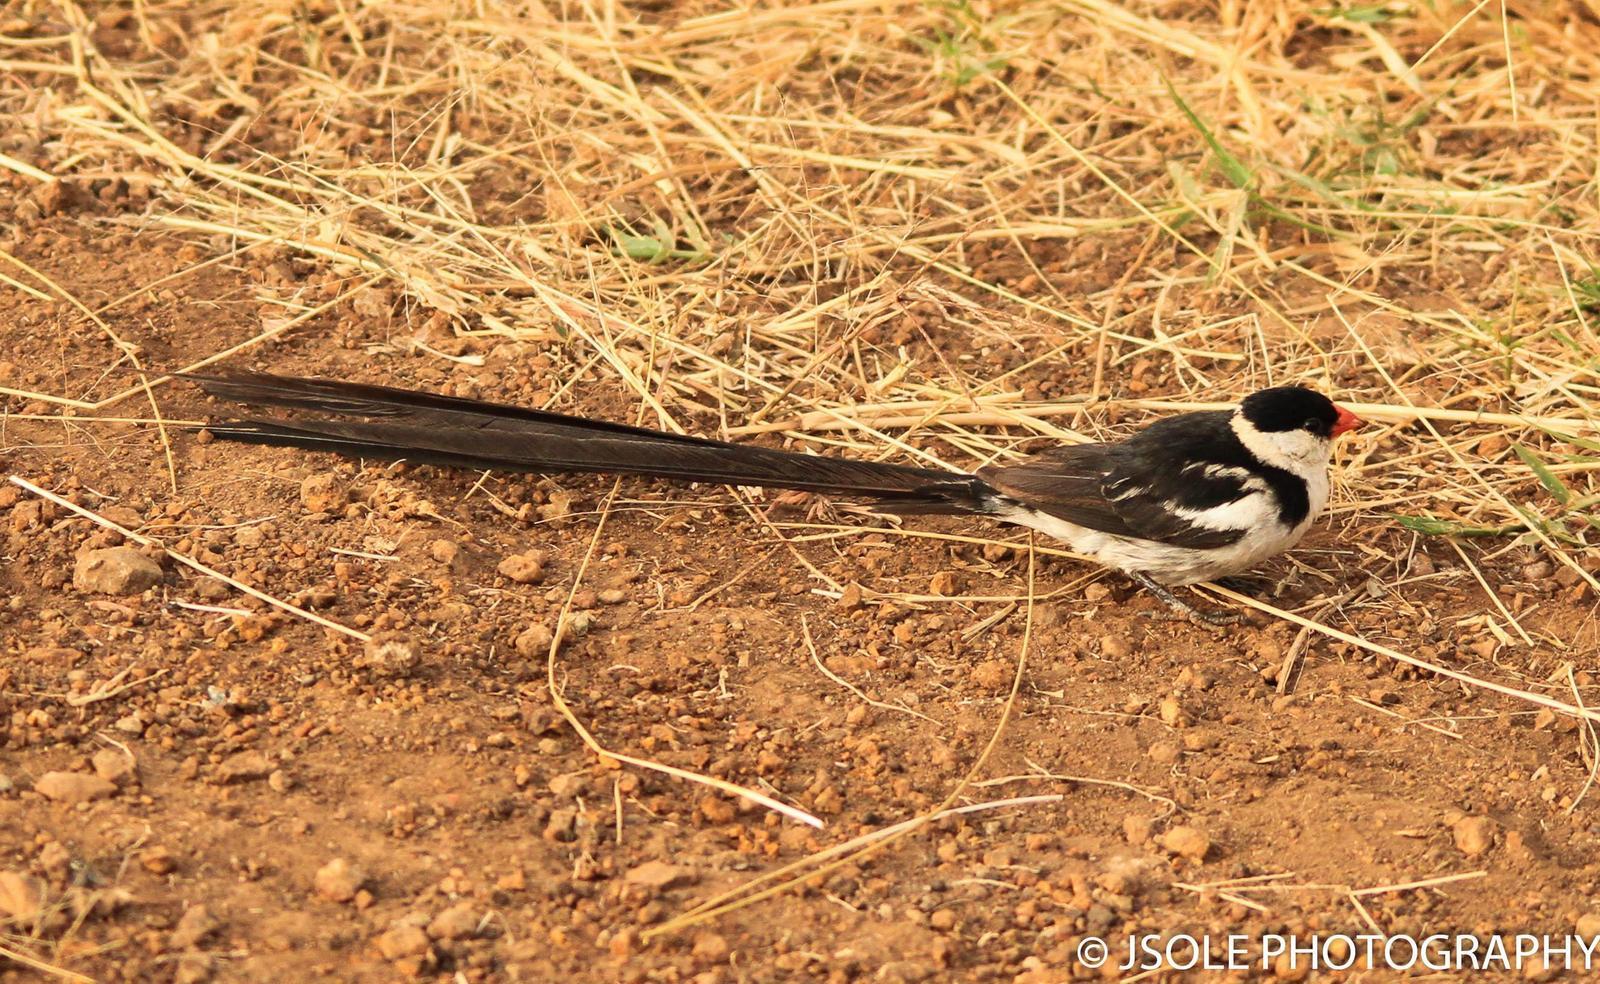 Pin-tailed Whydah Photo by Jeffery Sole